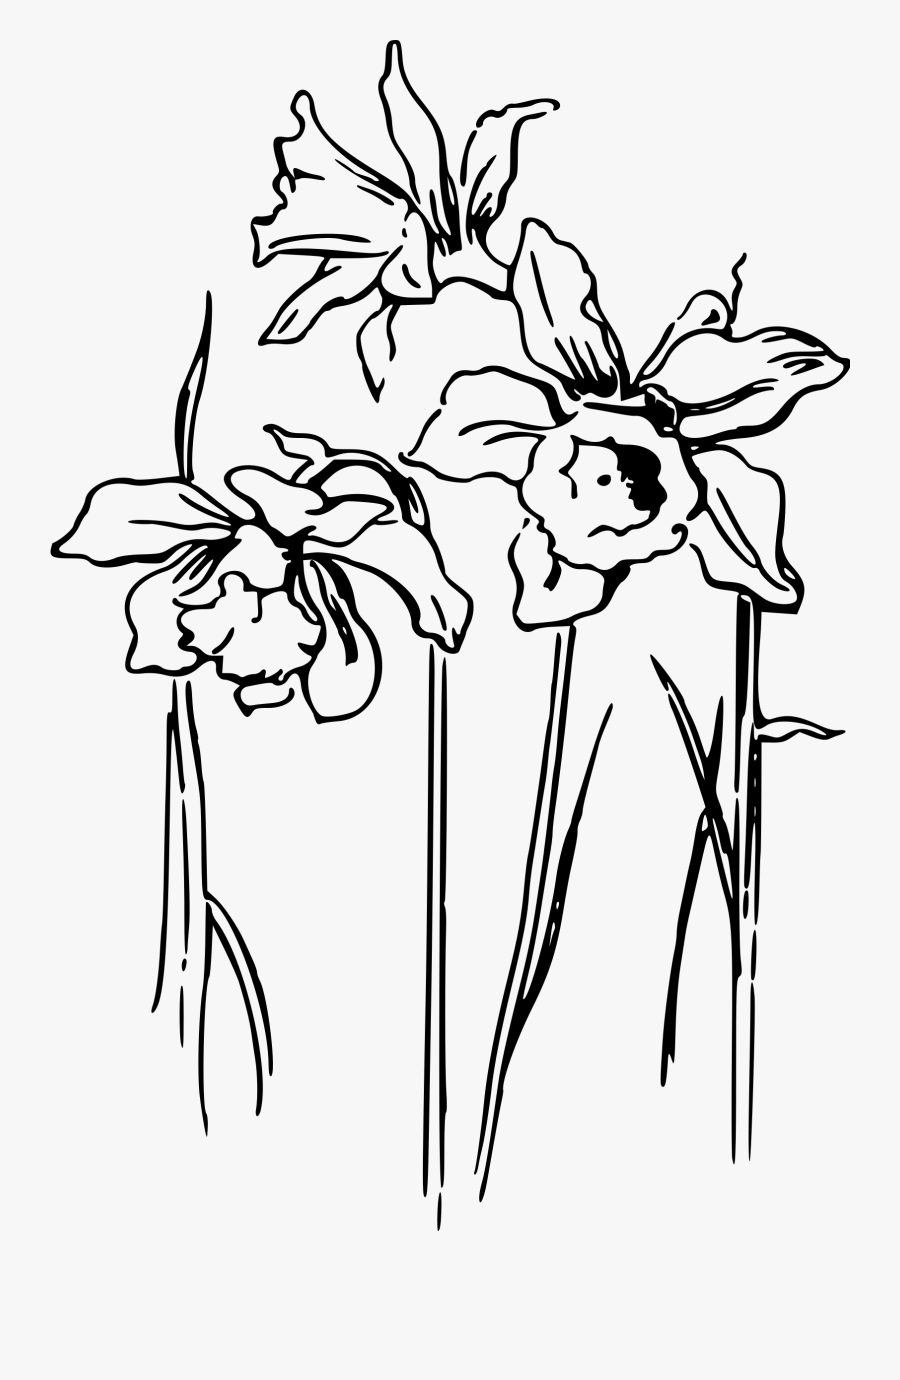 Daffodils Drawing Huge Freebie Download For Powerpoint - Daffodil Line Drawing Png, Transparent Clipart